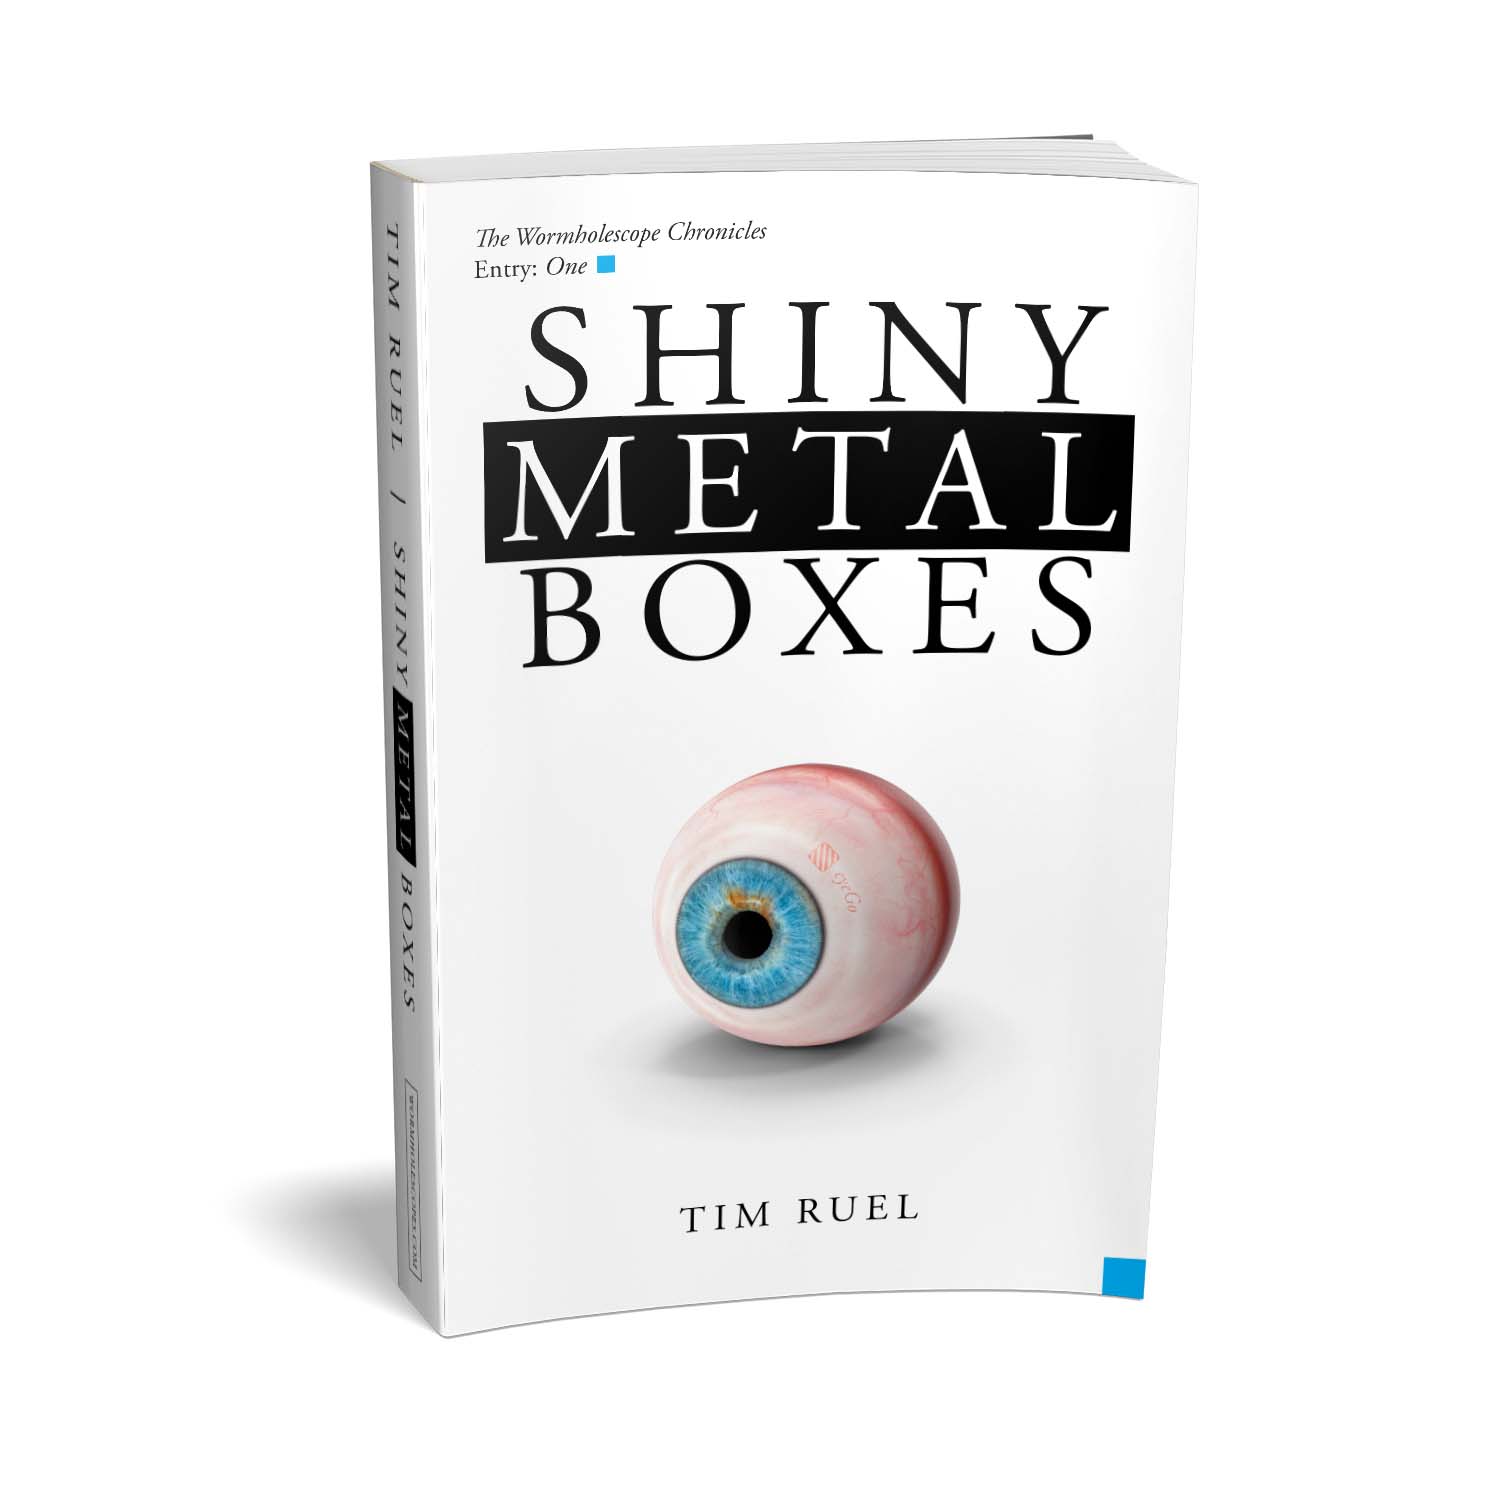 Shiny Metal Boxes is satrical scifi story by Tim Ruel. The book cover was designed by Mark Thomas of coverness.com. To find out more about my book design services, please visit www.coverness.com